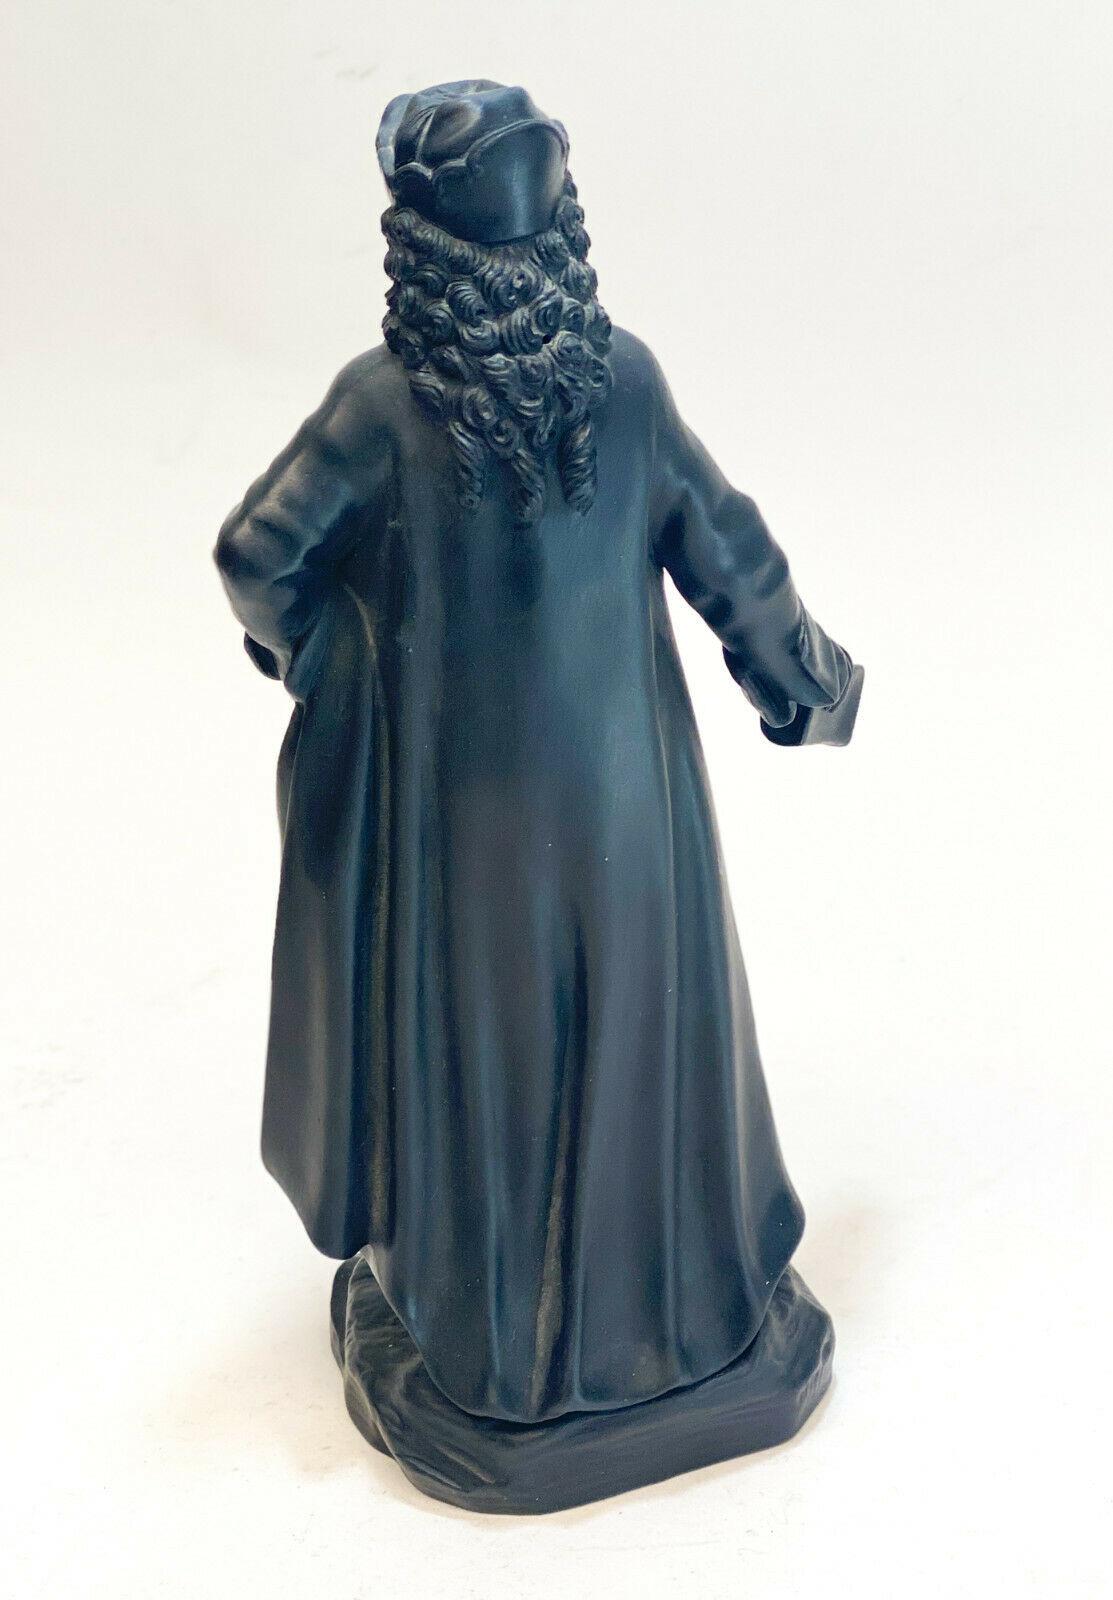 Wedgwood black basalt pottery bust sculpture of French historian and philosopher, Voltaire (François-Marie Arouet). Marked Wedgwood to the underside, 19th century.

Weight approximate, 1 lb

Measures: Approximate, 5.5 inches x 4 inches x 11